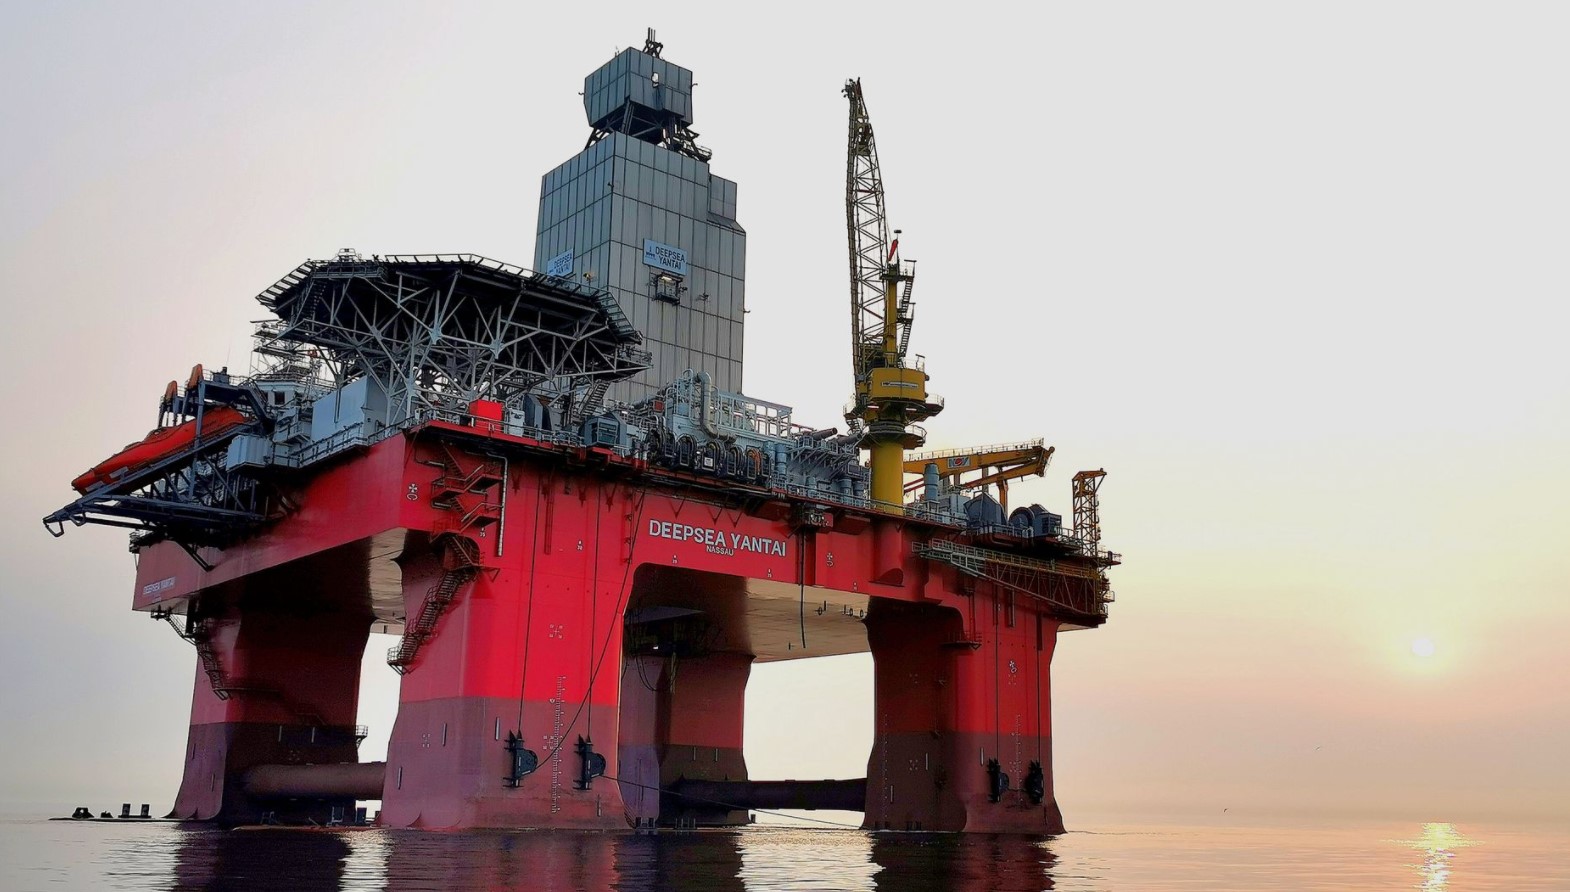 Deepsea Yantai, rig used for Dugong drilling; Source: Odfjell Drilling Neptune